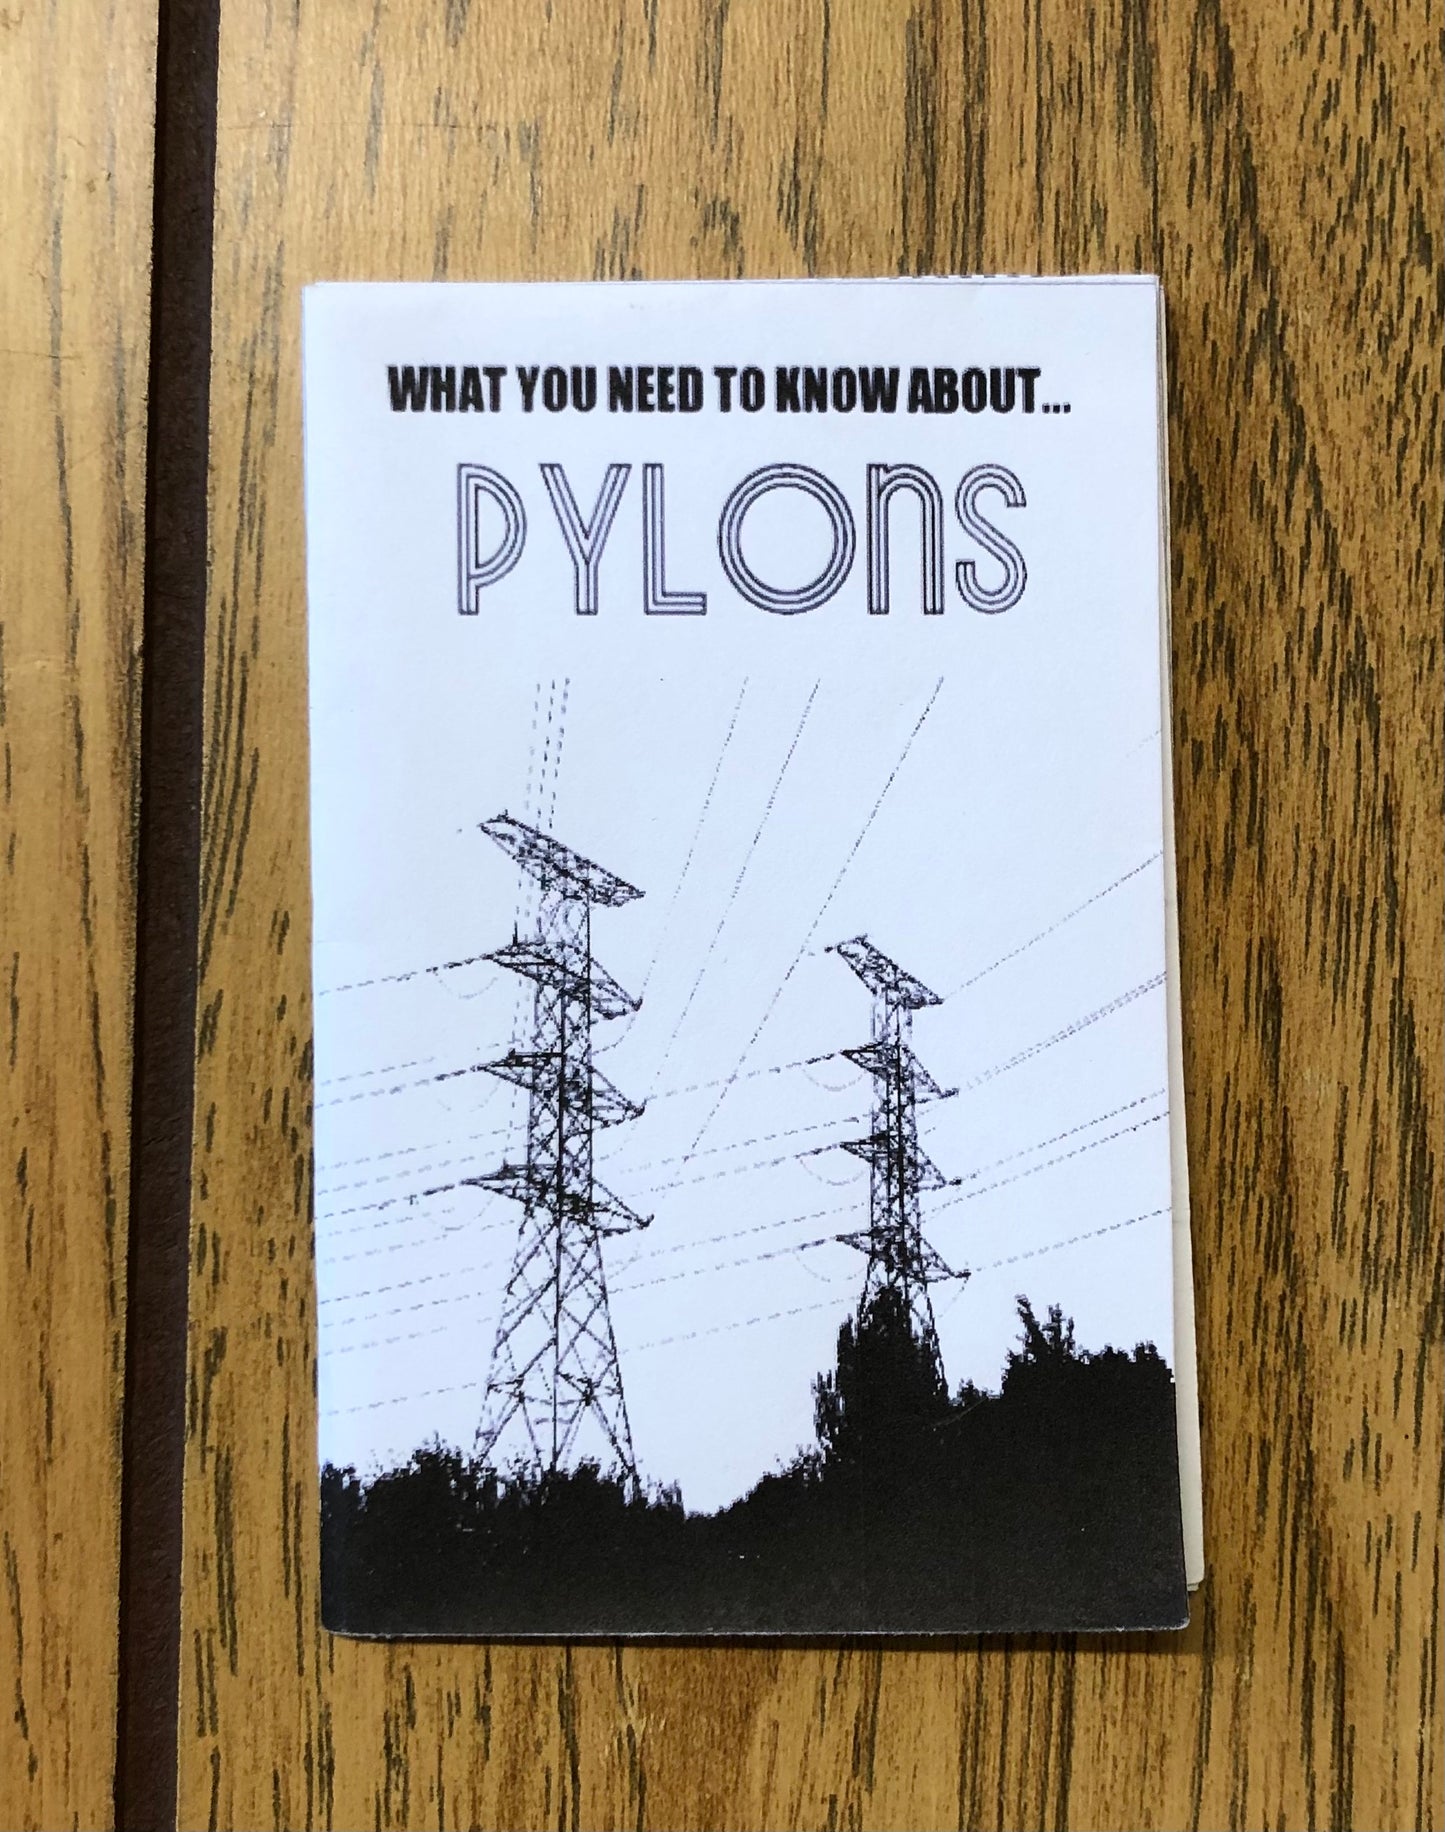 What You Need to Know About Pylons